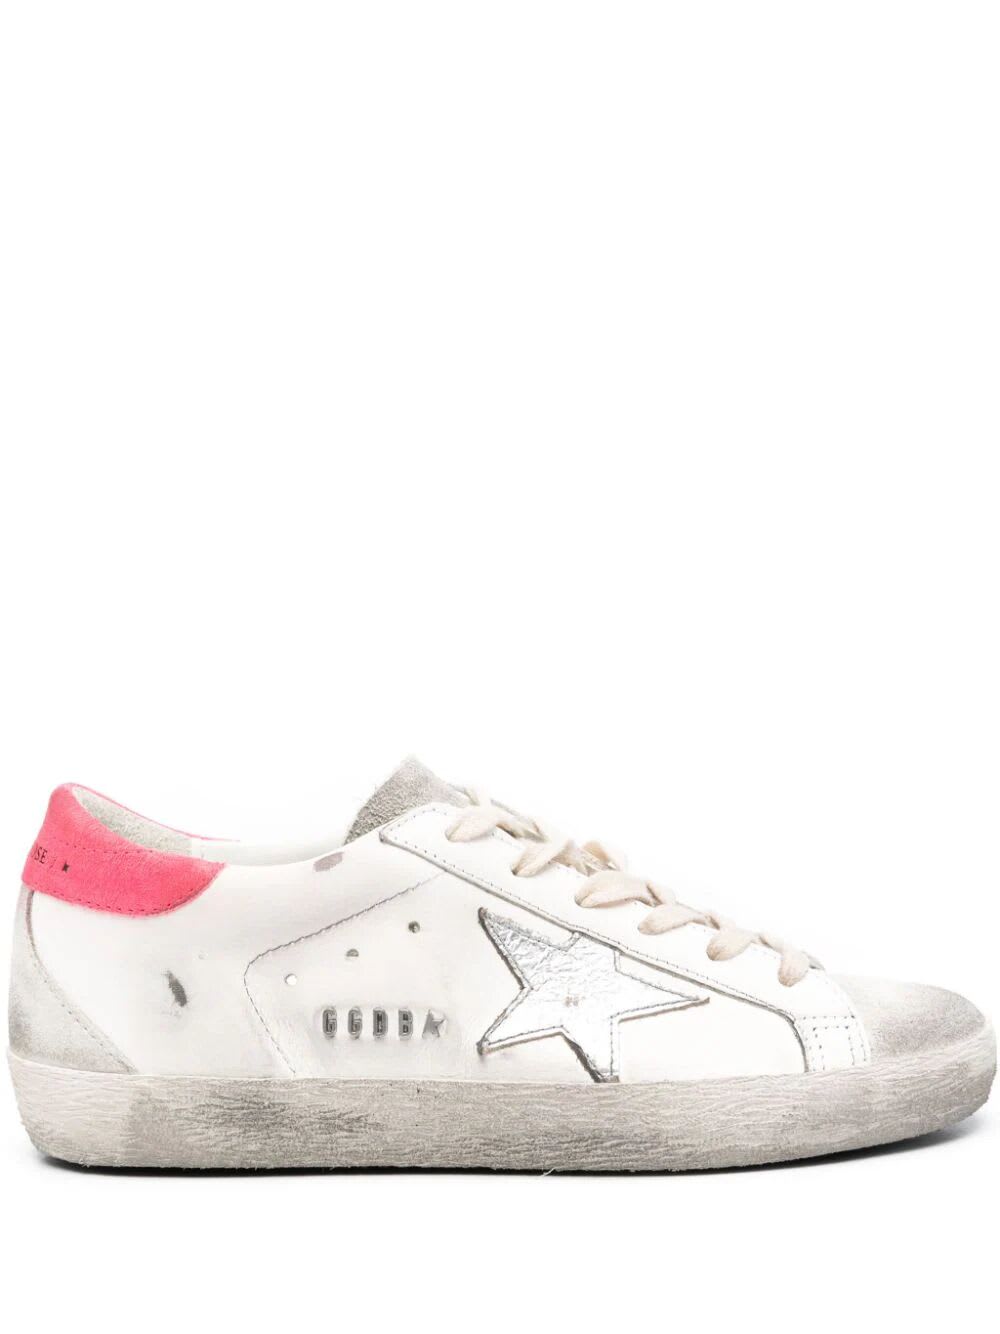 Golden Goose Super-star Sneakers In White Ice Silver Lobster Fluo